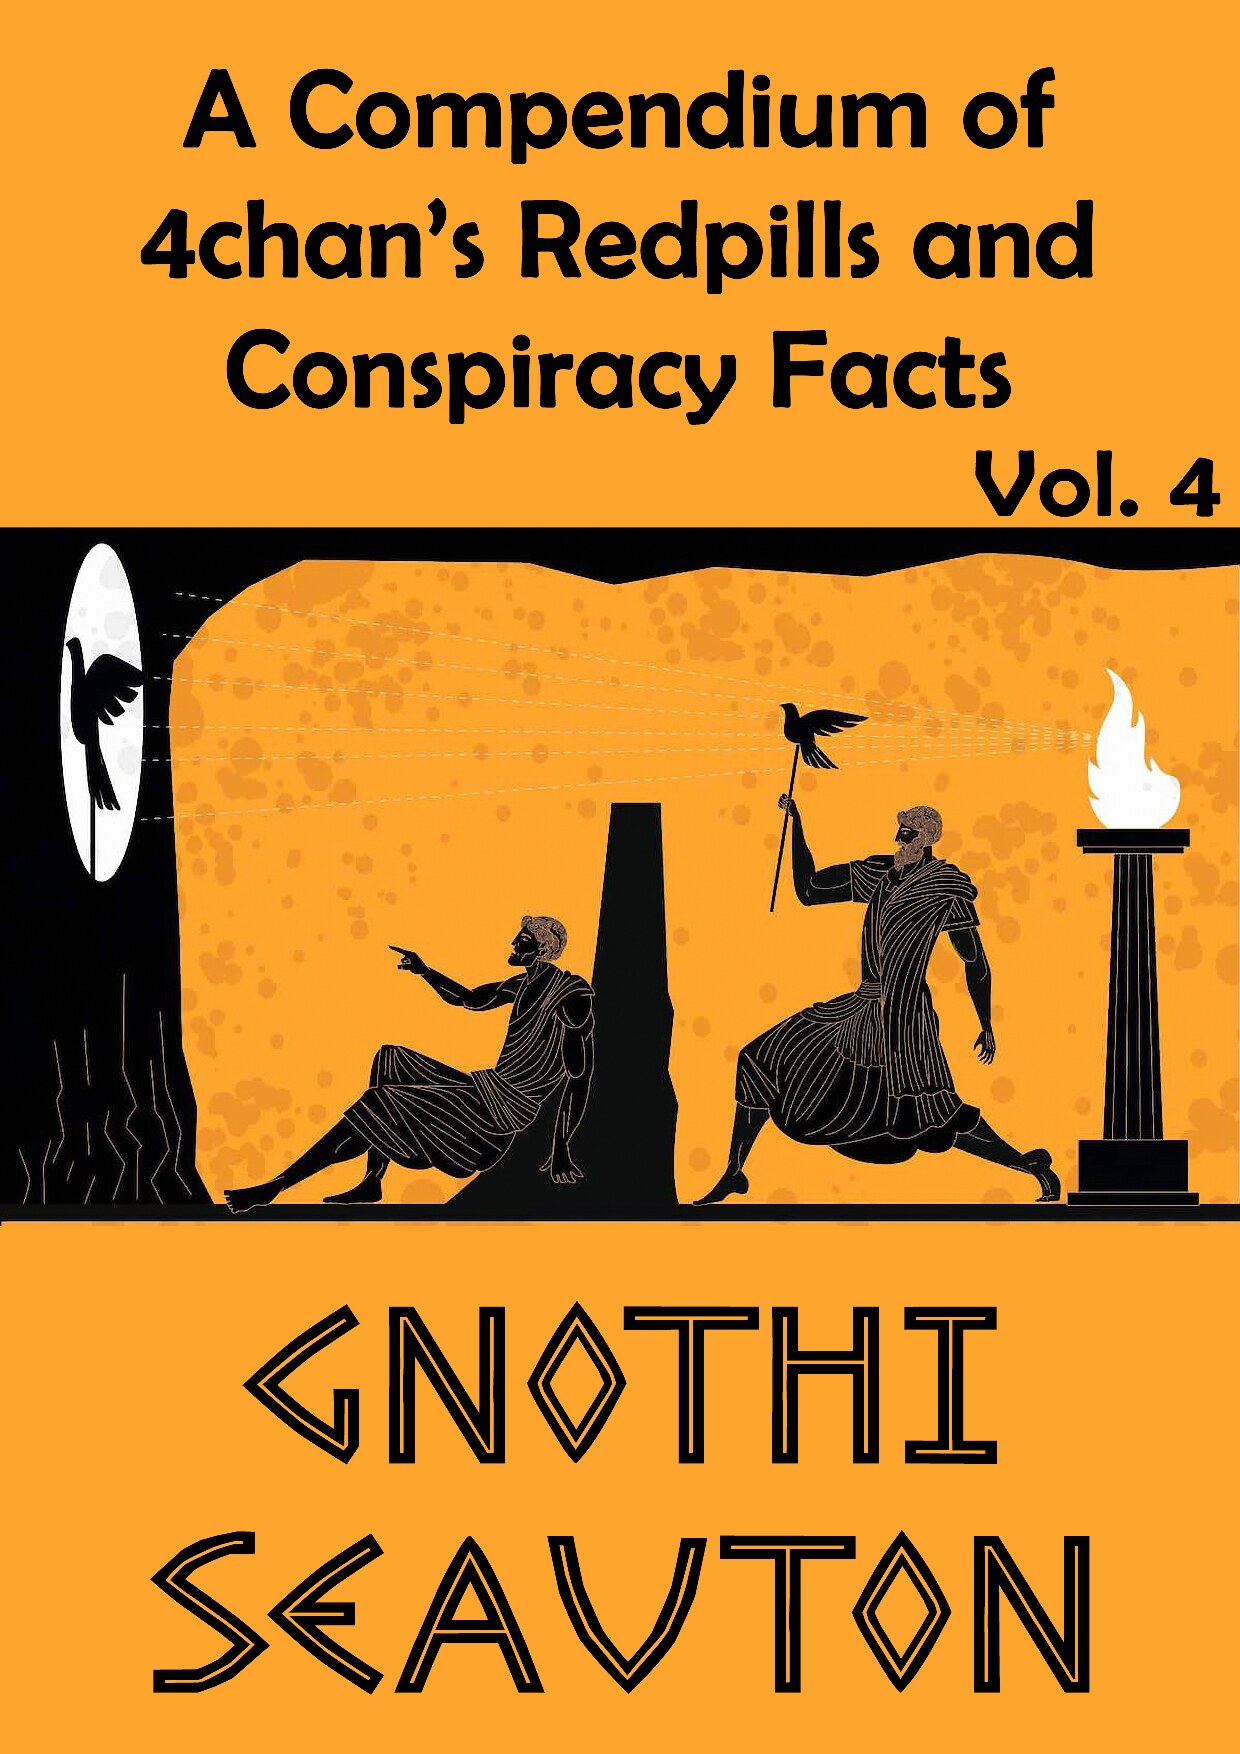 A Compendium of 4chan's Redpills and Conspiracy Facts (Vol. 4)